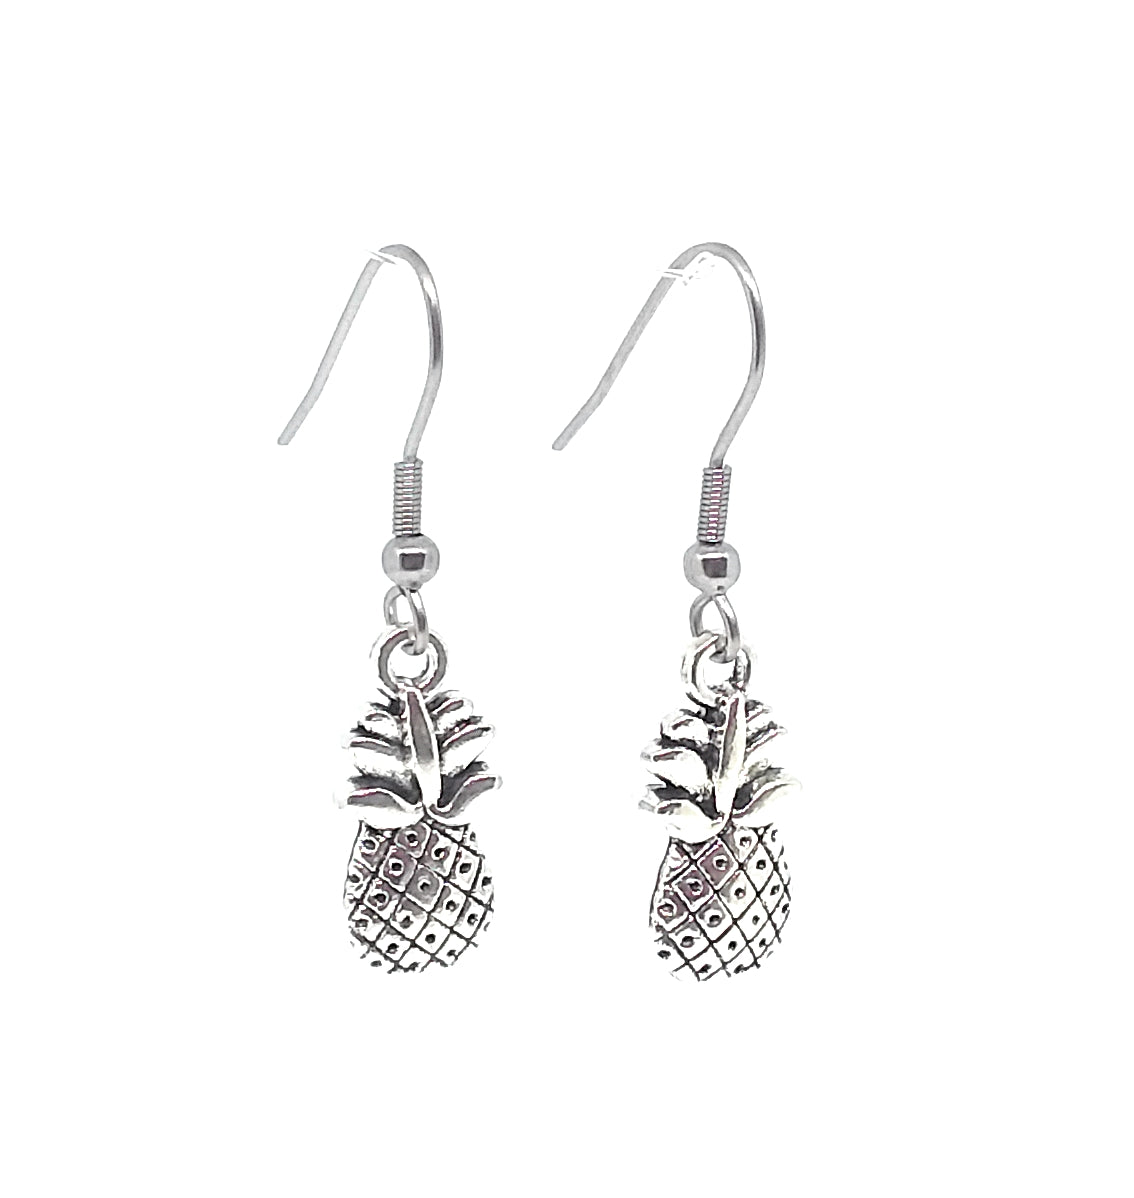 Pineapple Charm Dangle Earrings with Stainless Steel Ear Wires